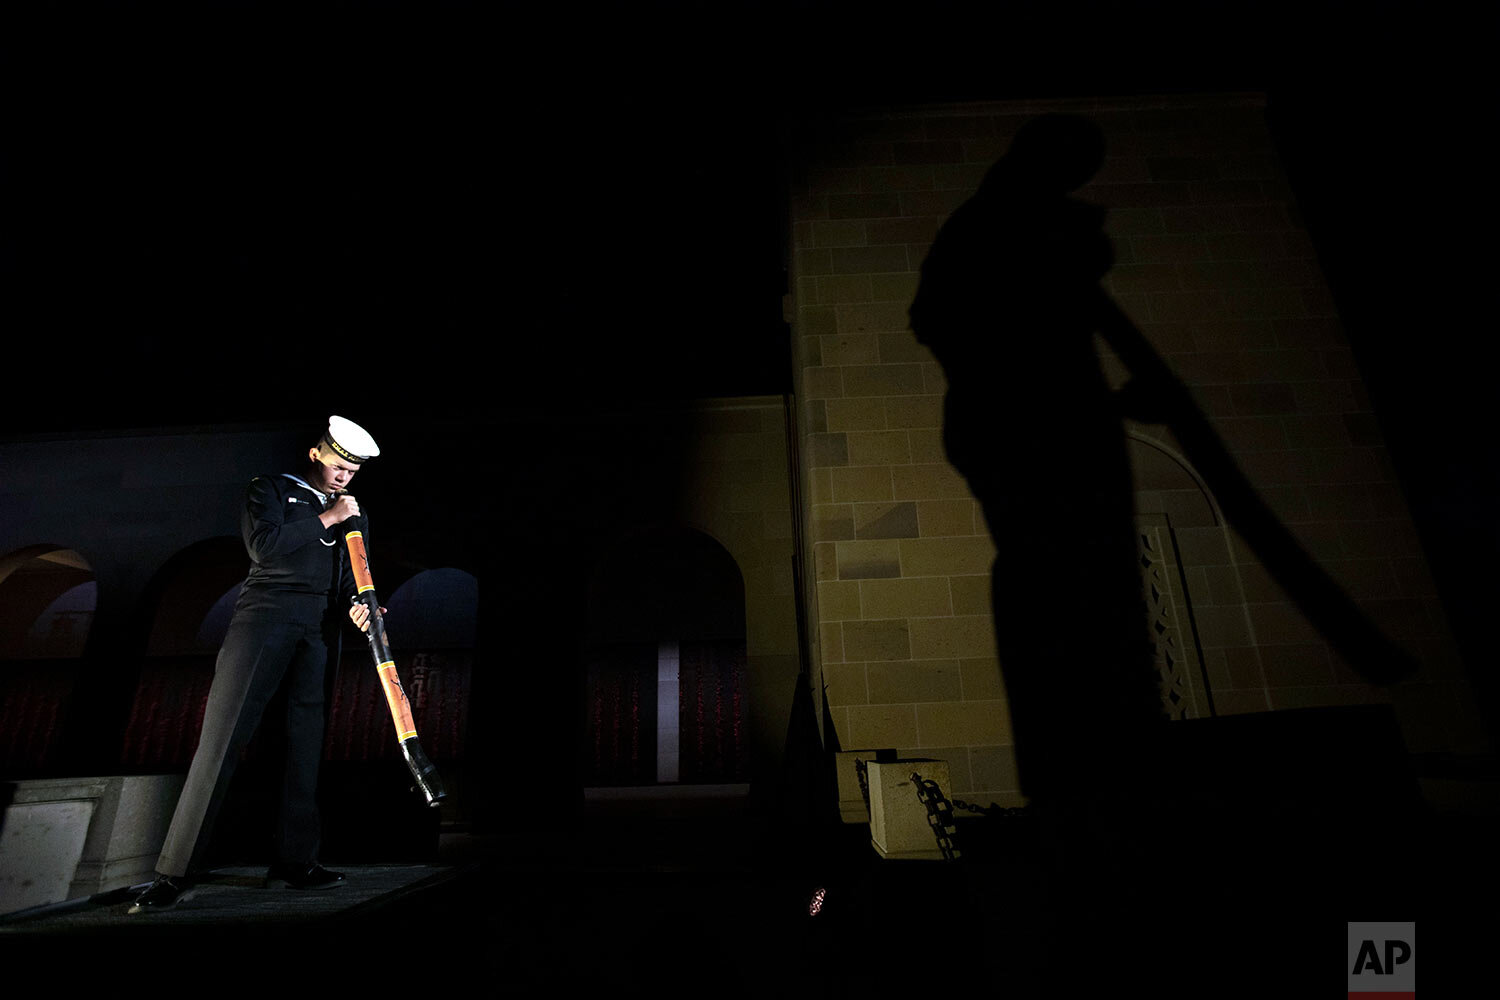  In this photo provided by the Australian War Memorial, Seaman Lynton Robbins of the Royal Australian Navy, plays the didgeridoo during Anzac Day Commemorative Service at the Australian War Memorial in Canberra Saturday, April 25, 2020. (Sean Davey/A